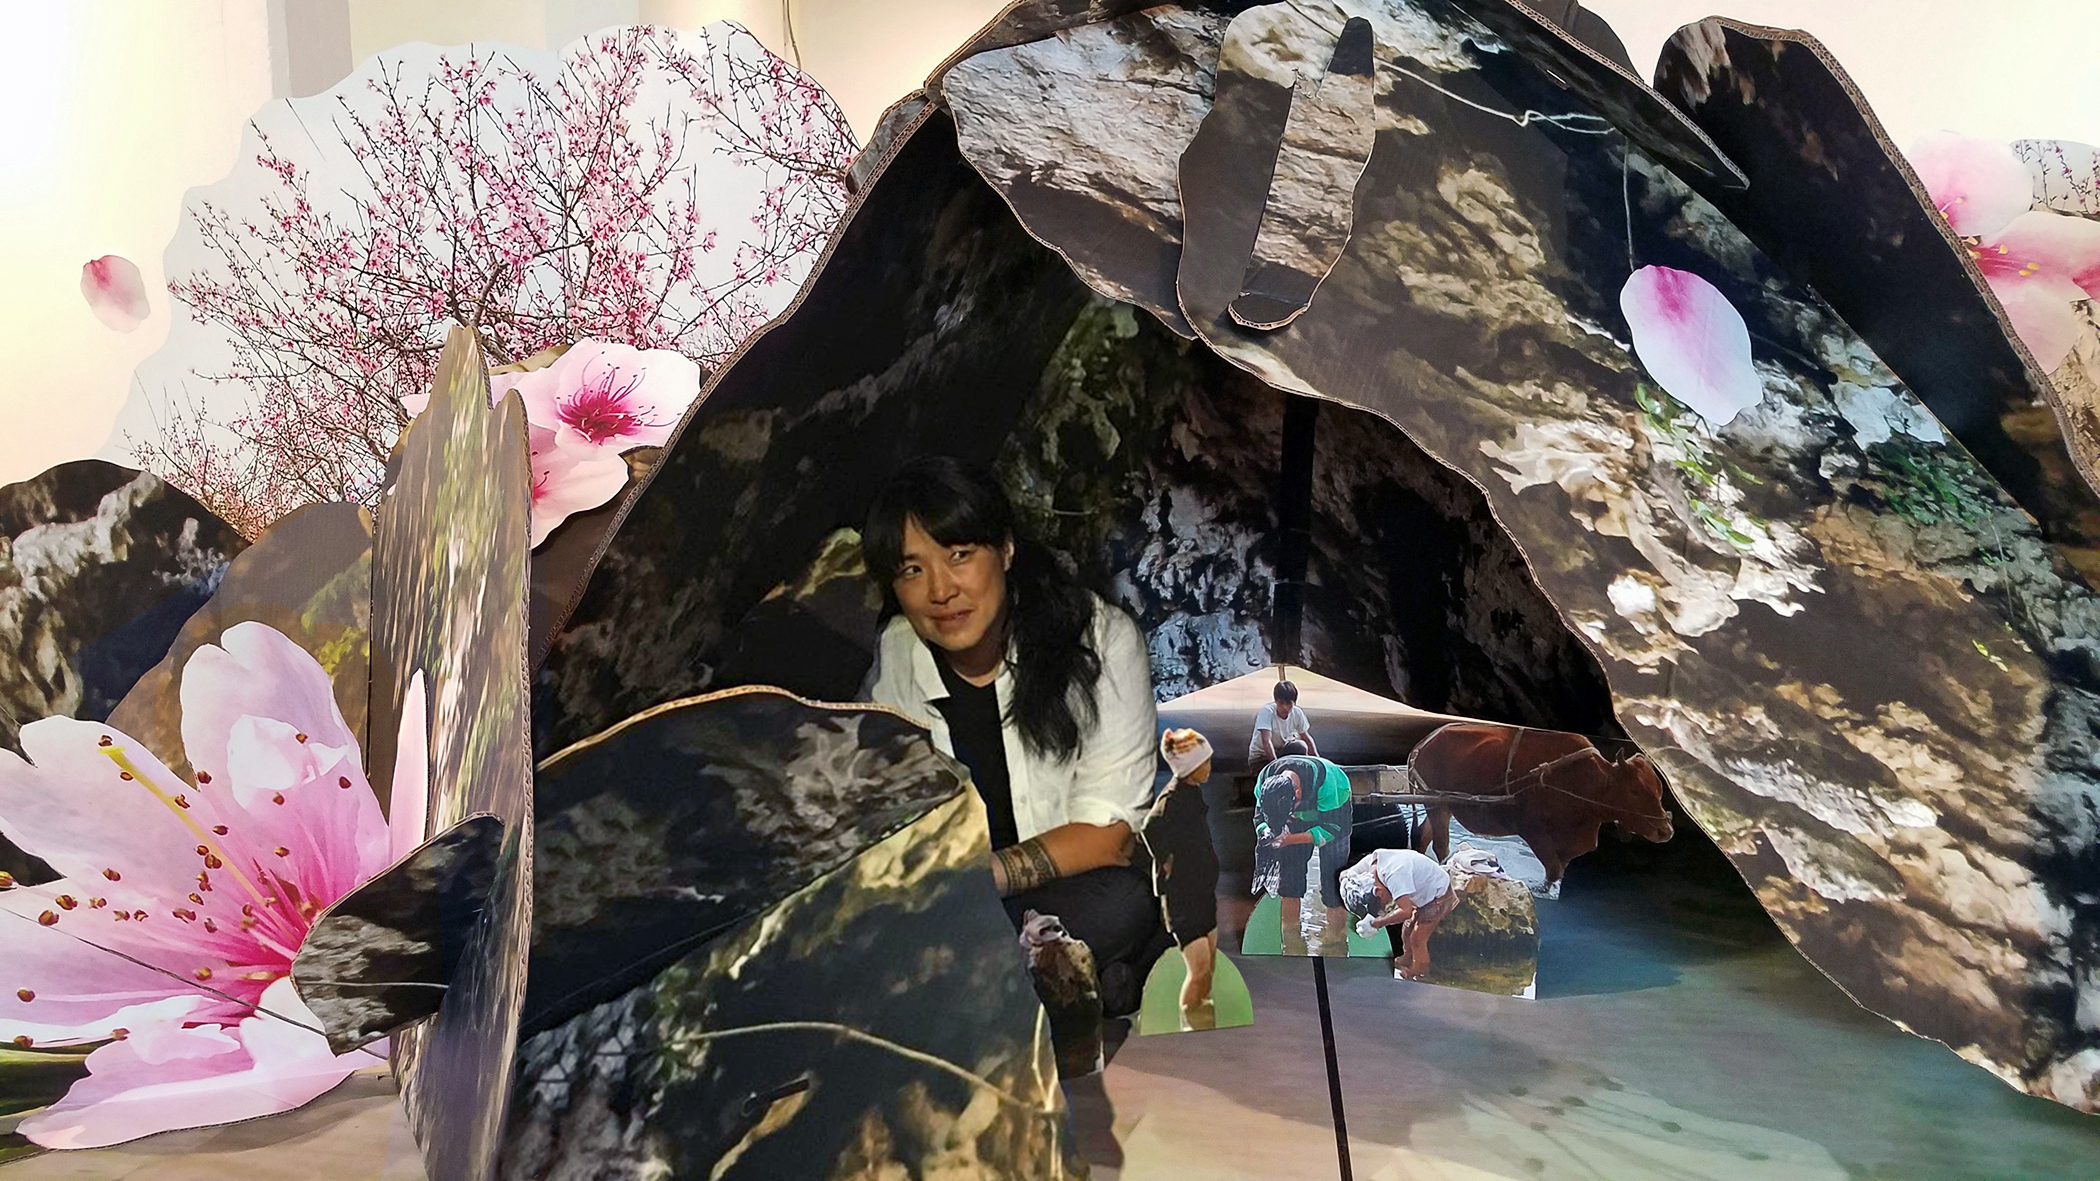 A three-dimensional photo collage of natural images creating a dome over images of five figures. The central figure is a light-skinned woman with long dark hair in a crouched position.